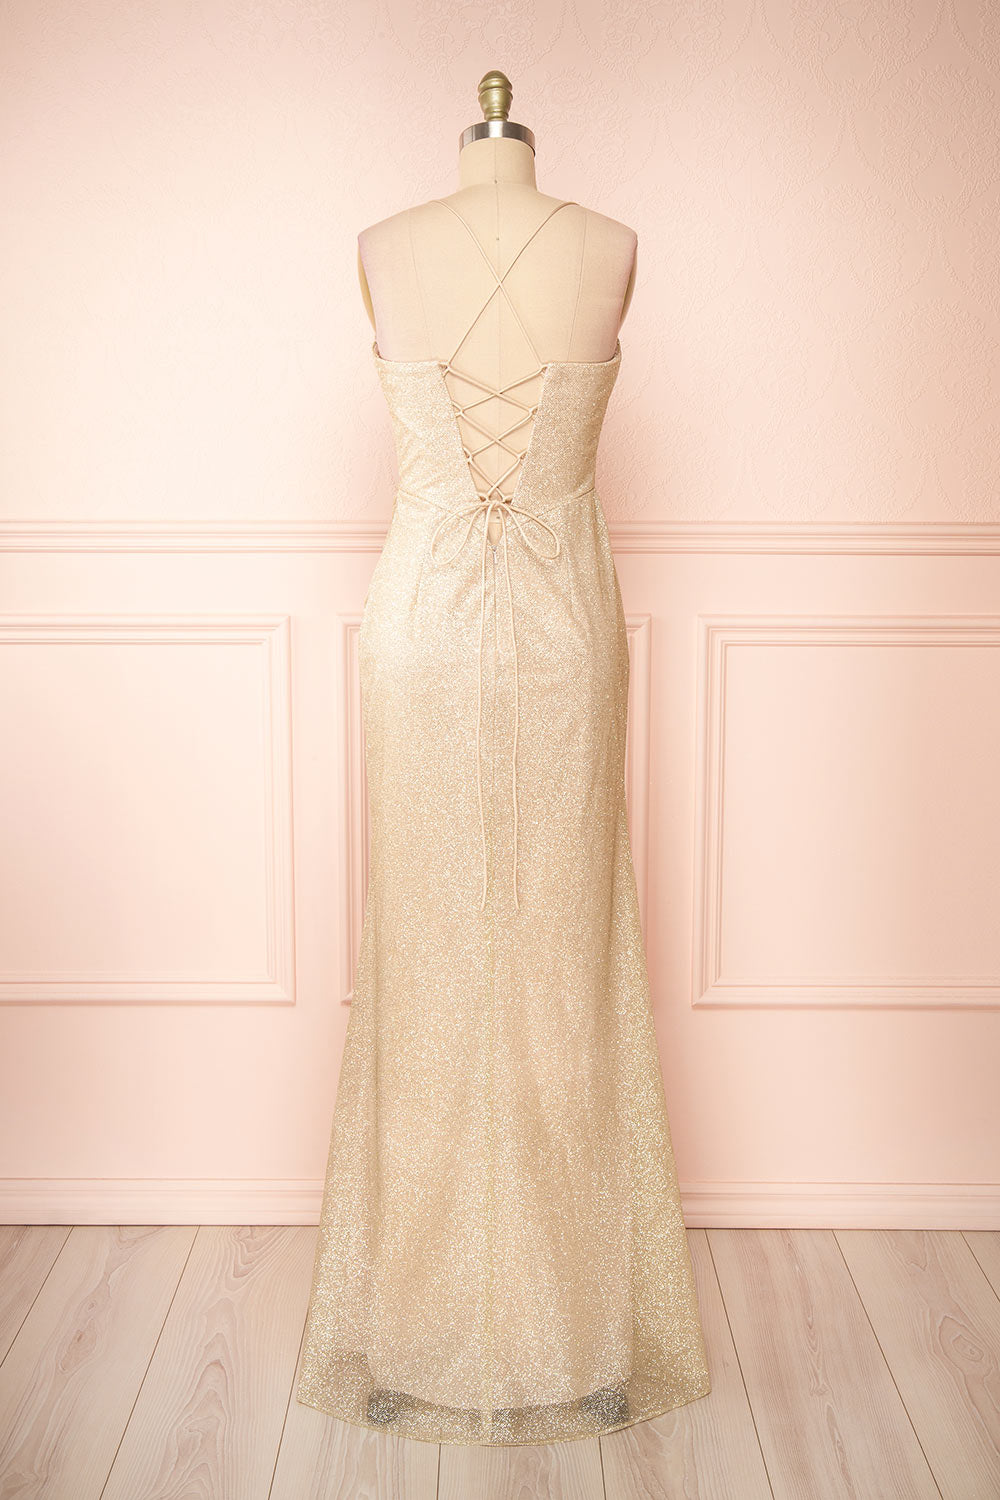 Frosti Champagne Sparkly Cowl Neck Maxi Dress | Boutique 1861 back view 